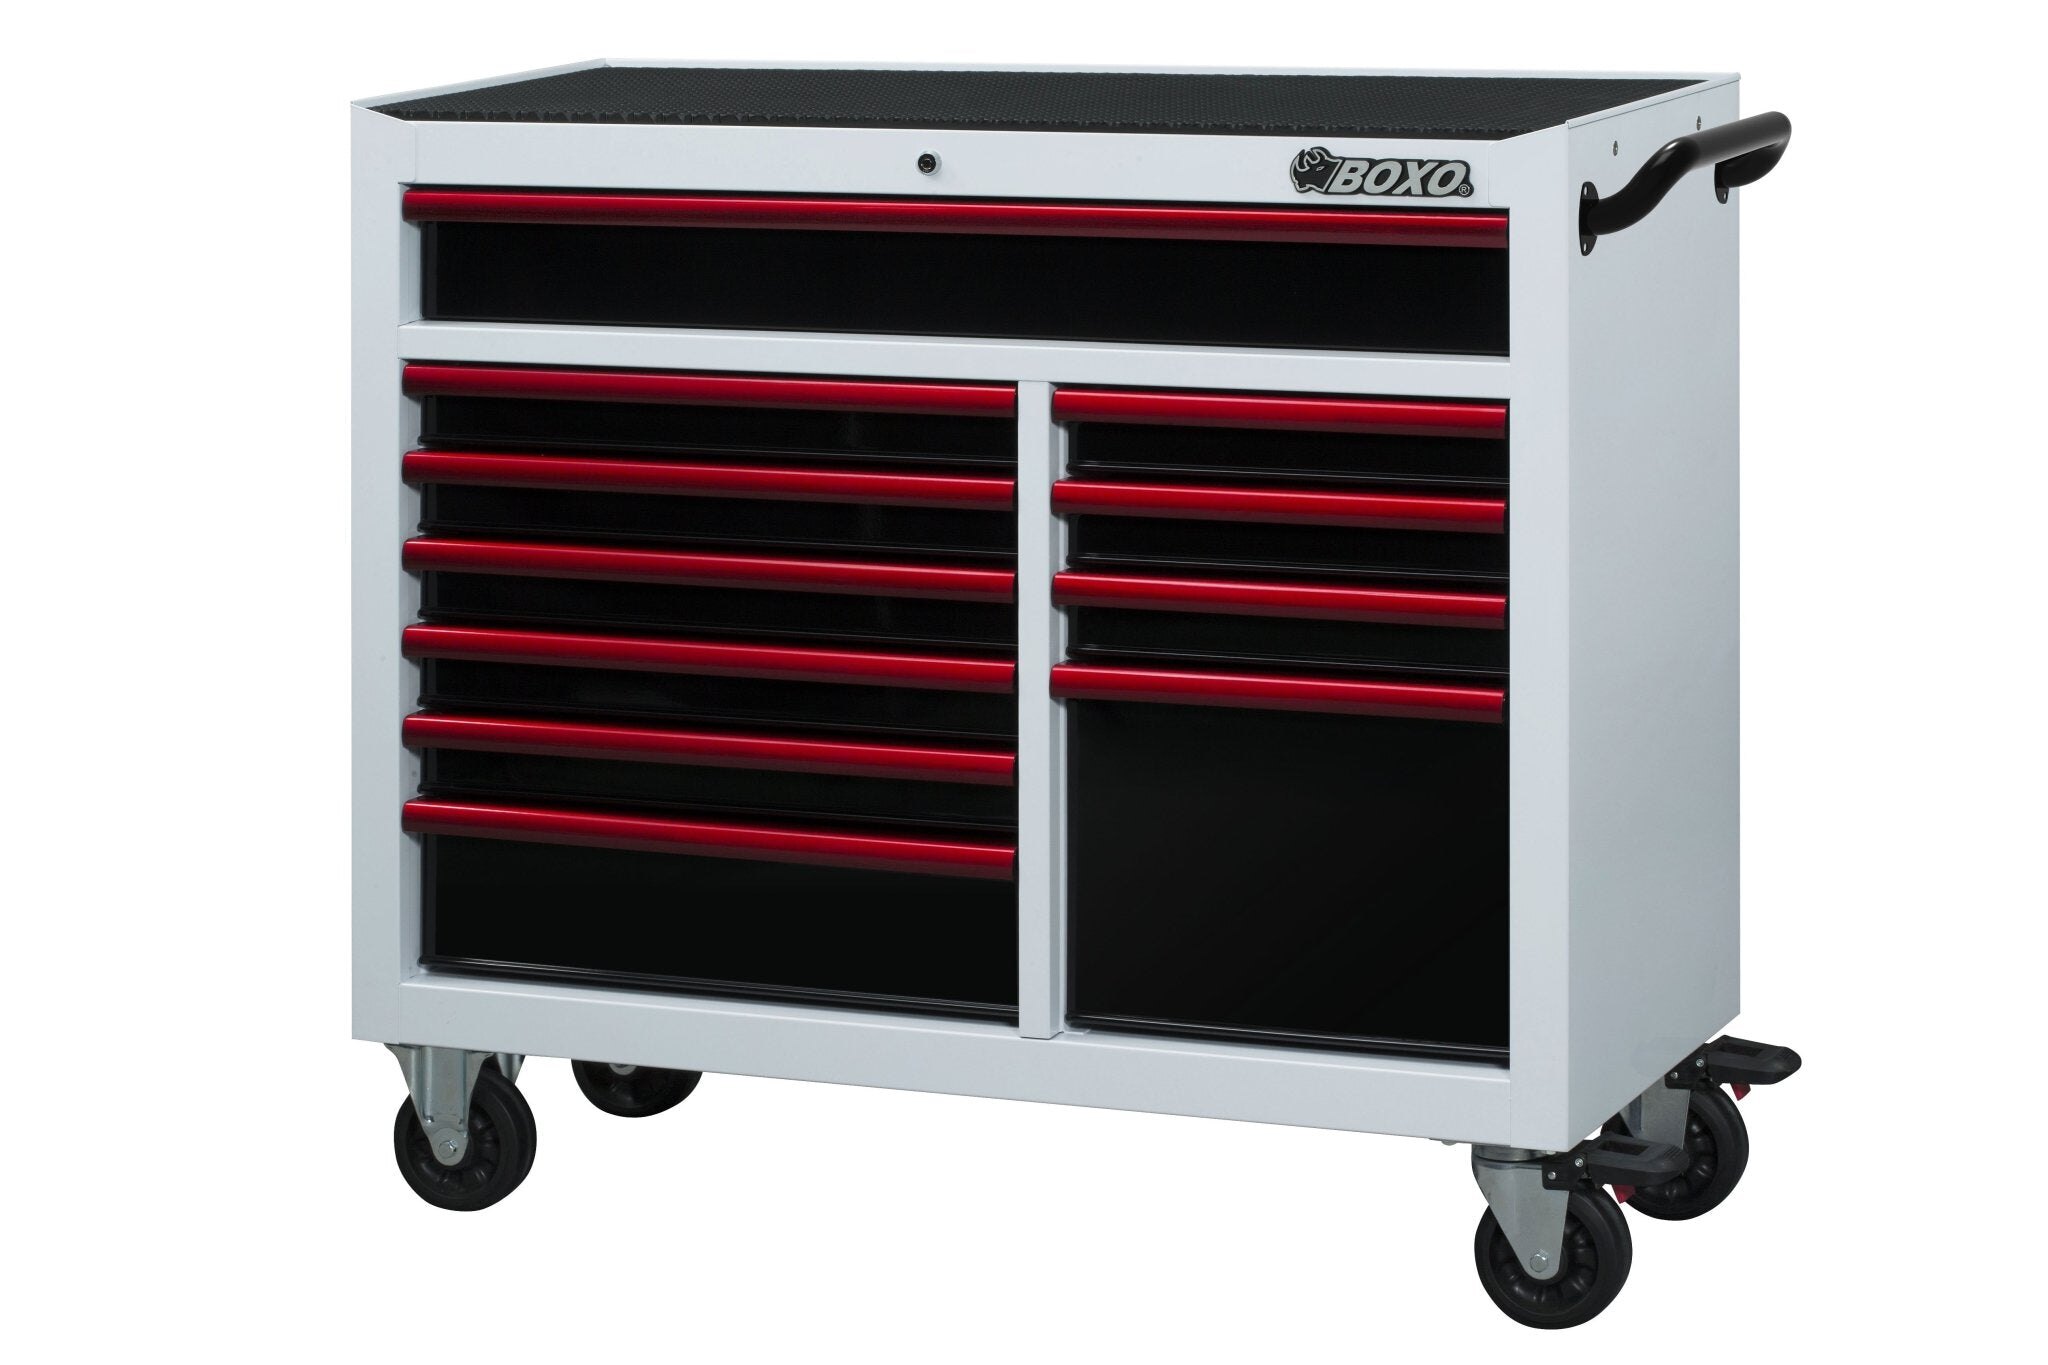 45" 11 Drawer Roll Cab (Gloss White Body/Gloss Black Drawers/ Red Anodized Drawer Pulls)